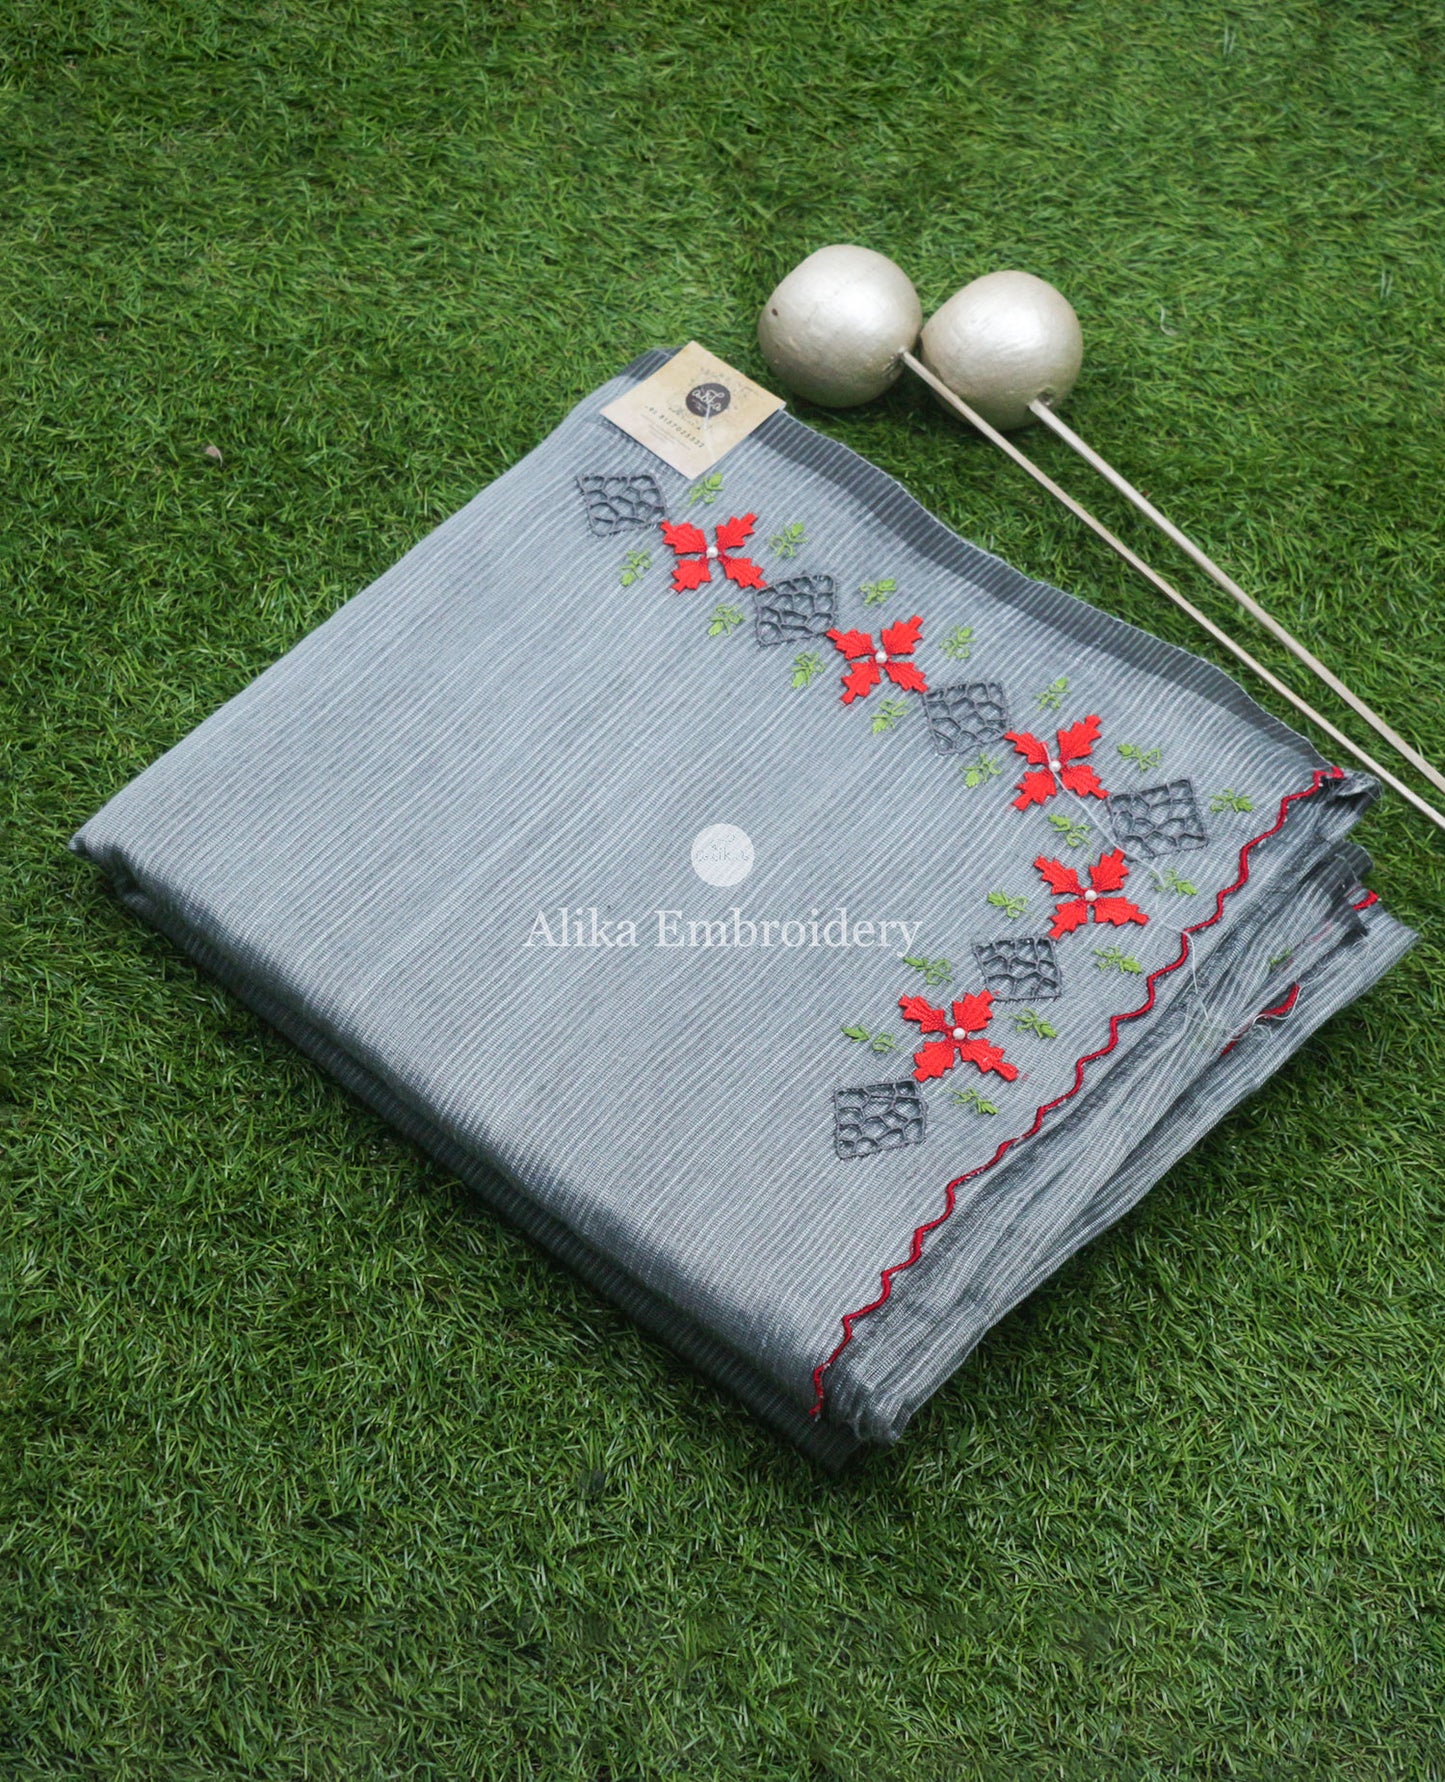 Sophisticated Grey Striped Kota Saree with Red Floral Embroidery and Cutwork